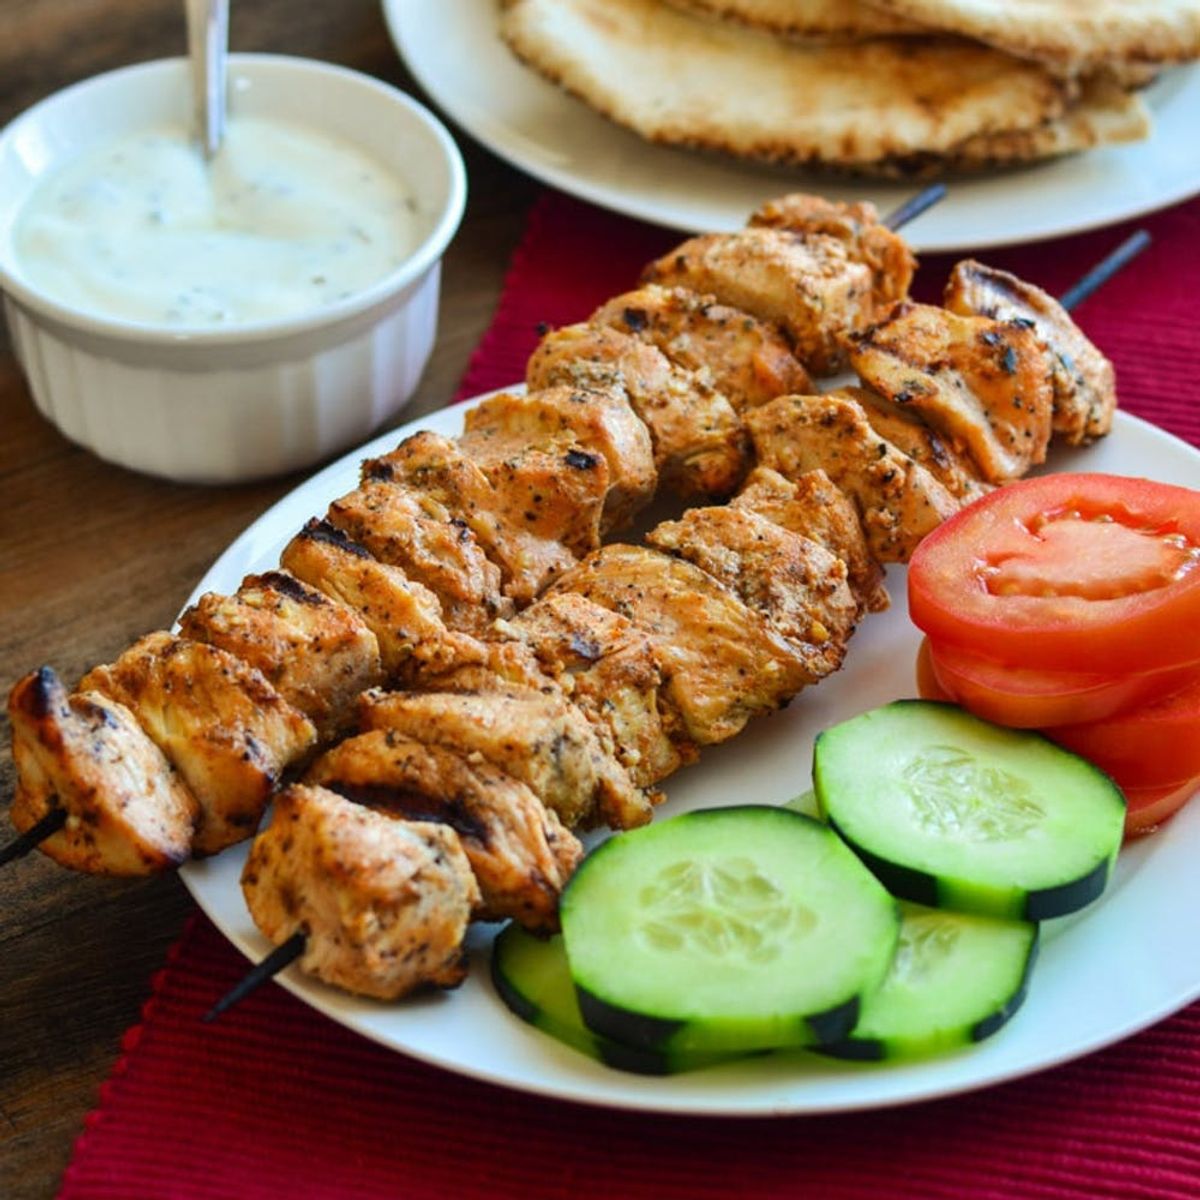 Spice Up Your Next Grill-Out With These 11 Middle Eastern-Inspired Recipes